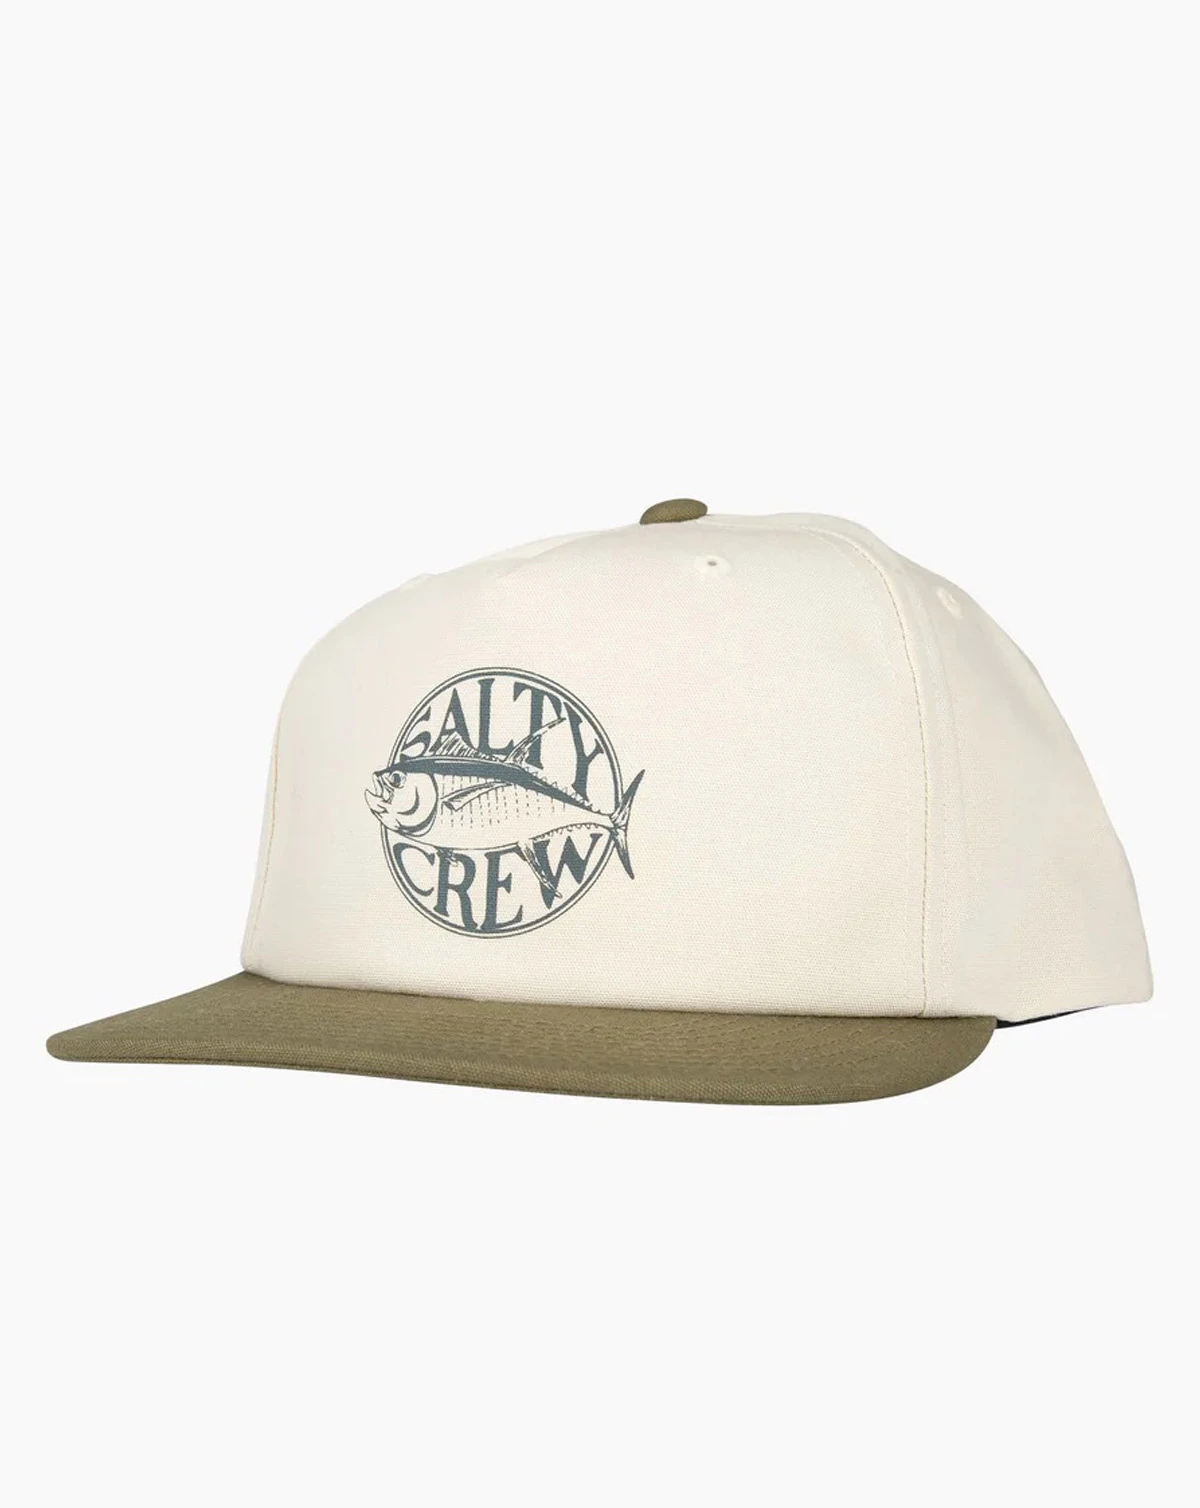 Army caps online – Buy Army & military caps | Army Star